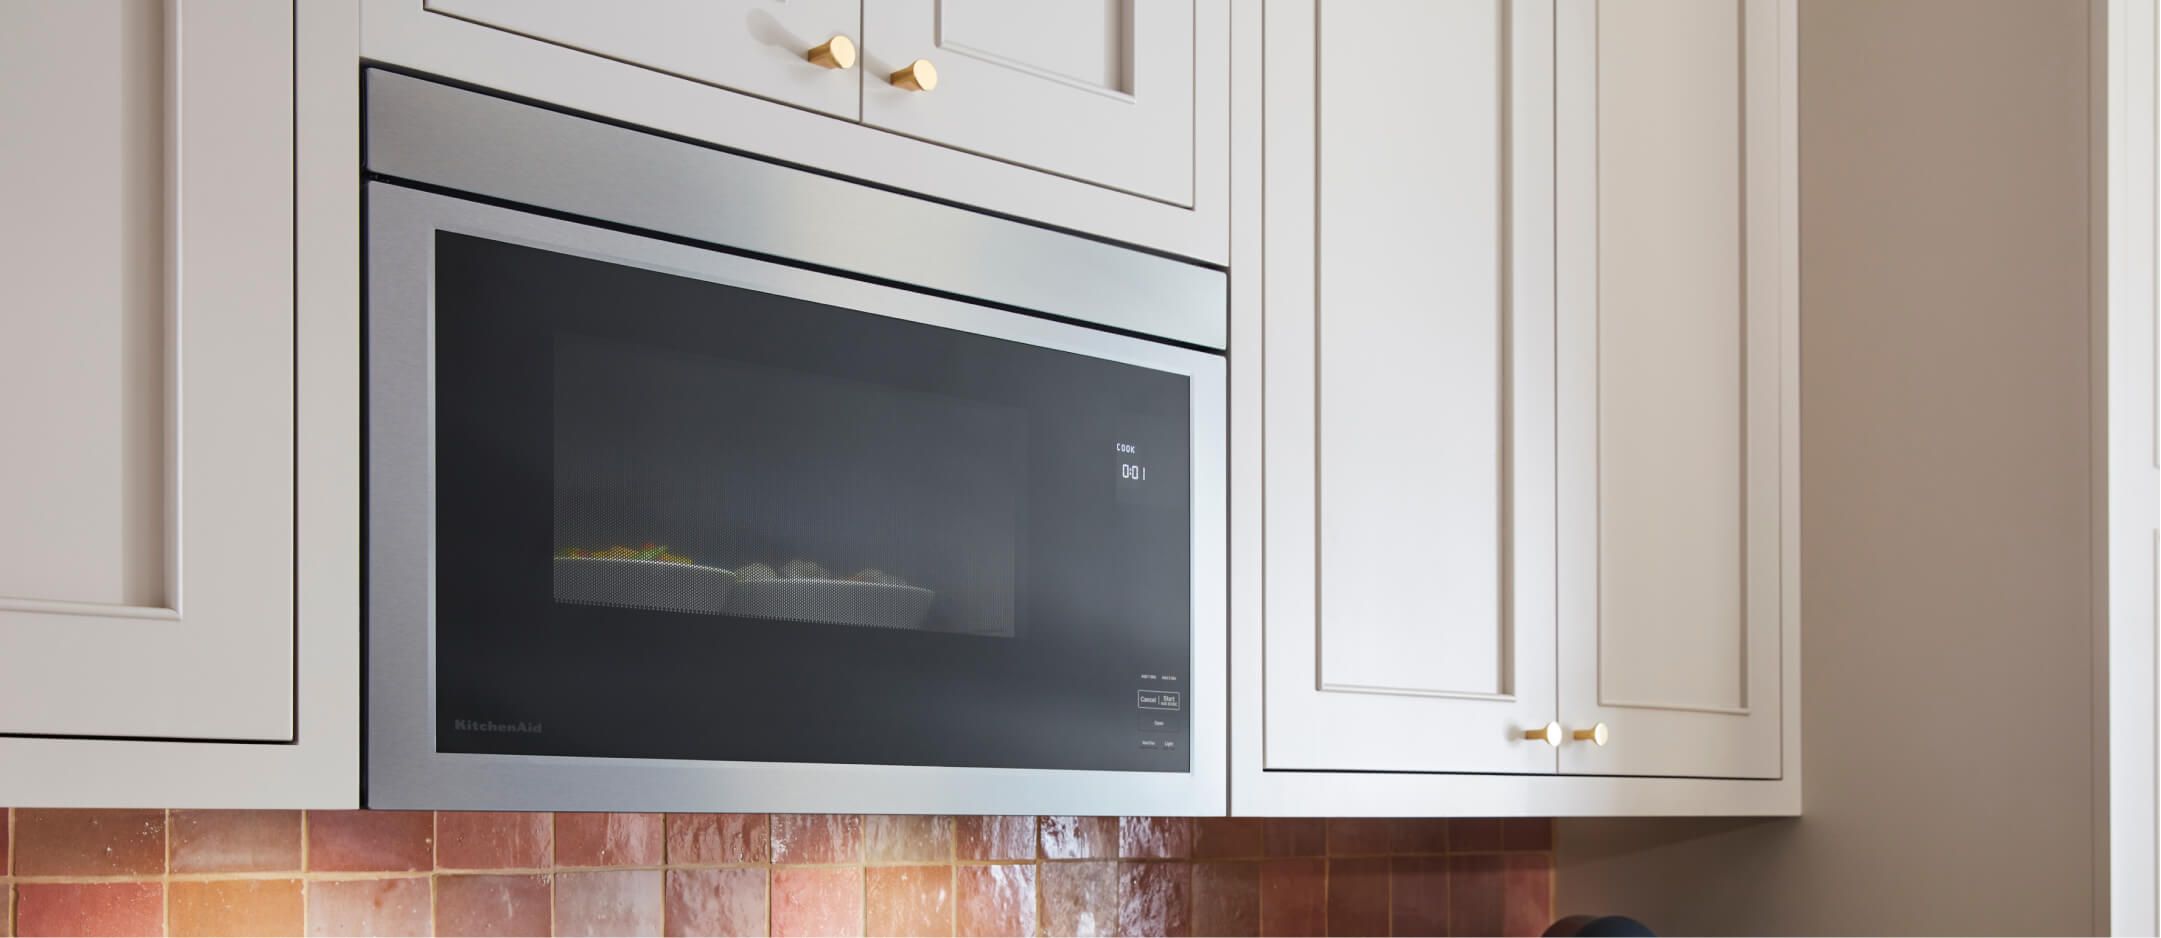 A flush KitchenAid® microwave installed over a range in line with cabinets. 